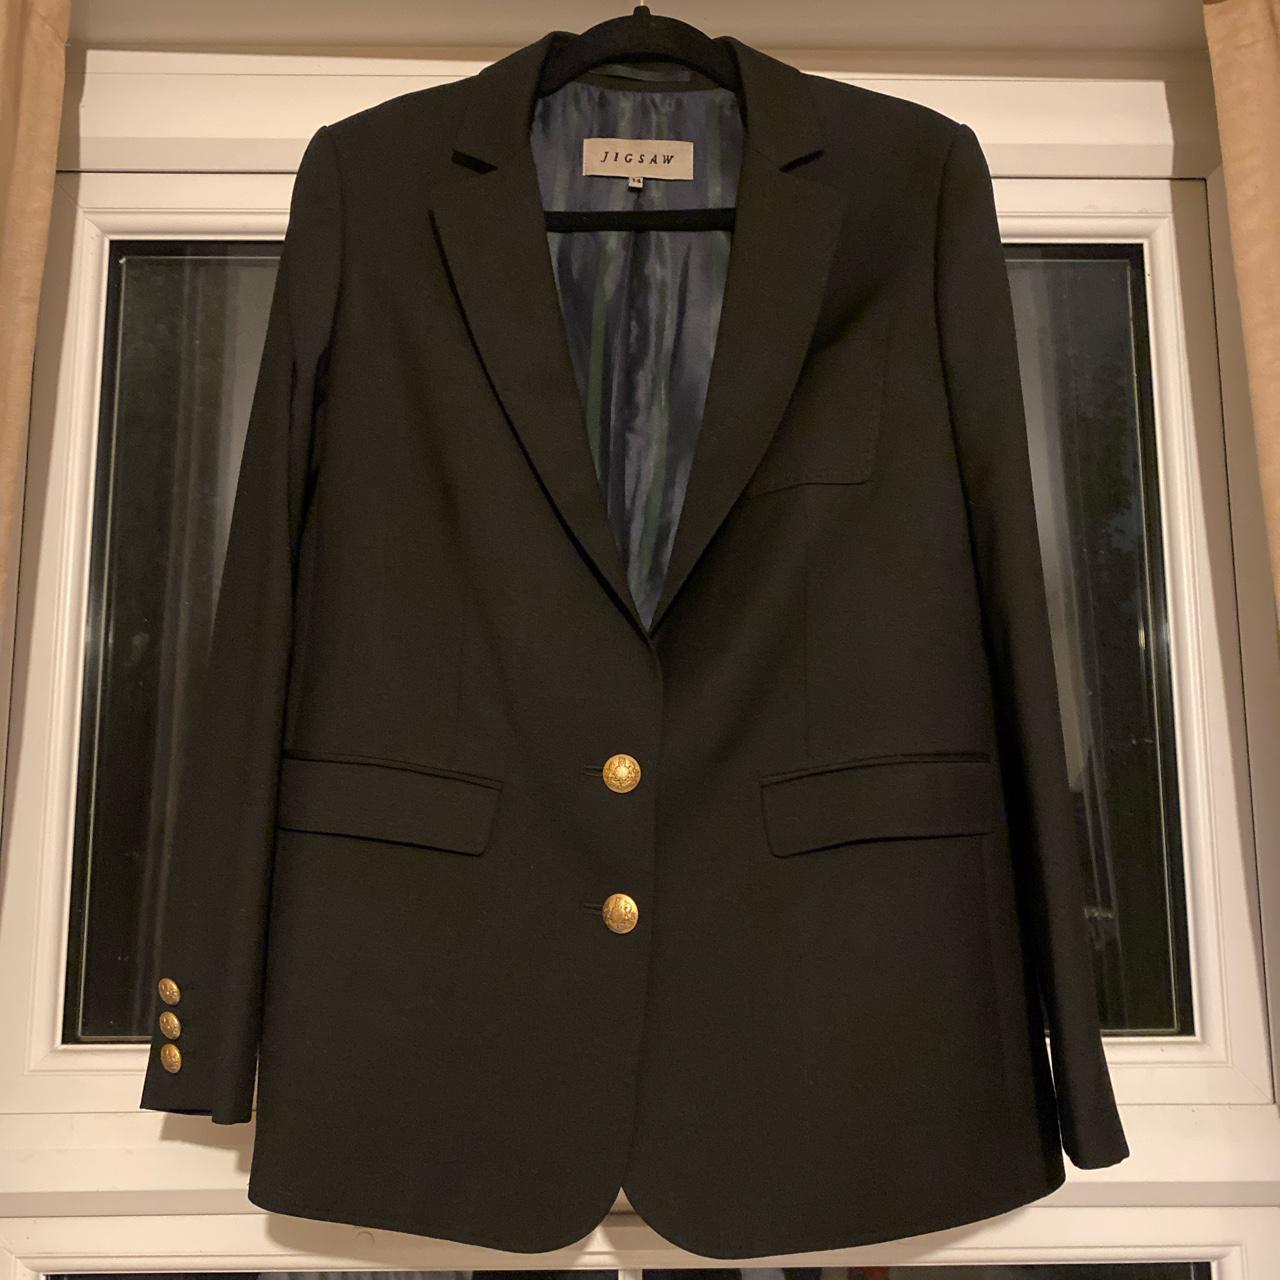 Stunning JIGSAW Blazer with gold buttons. This is a... - Depop